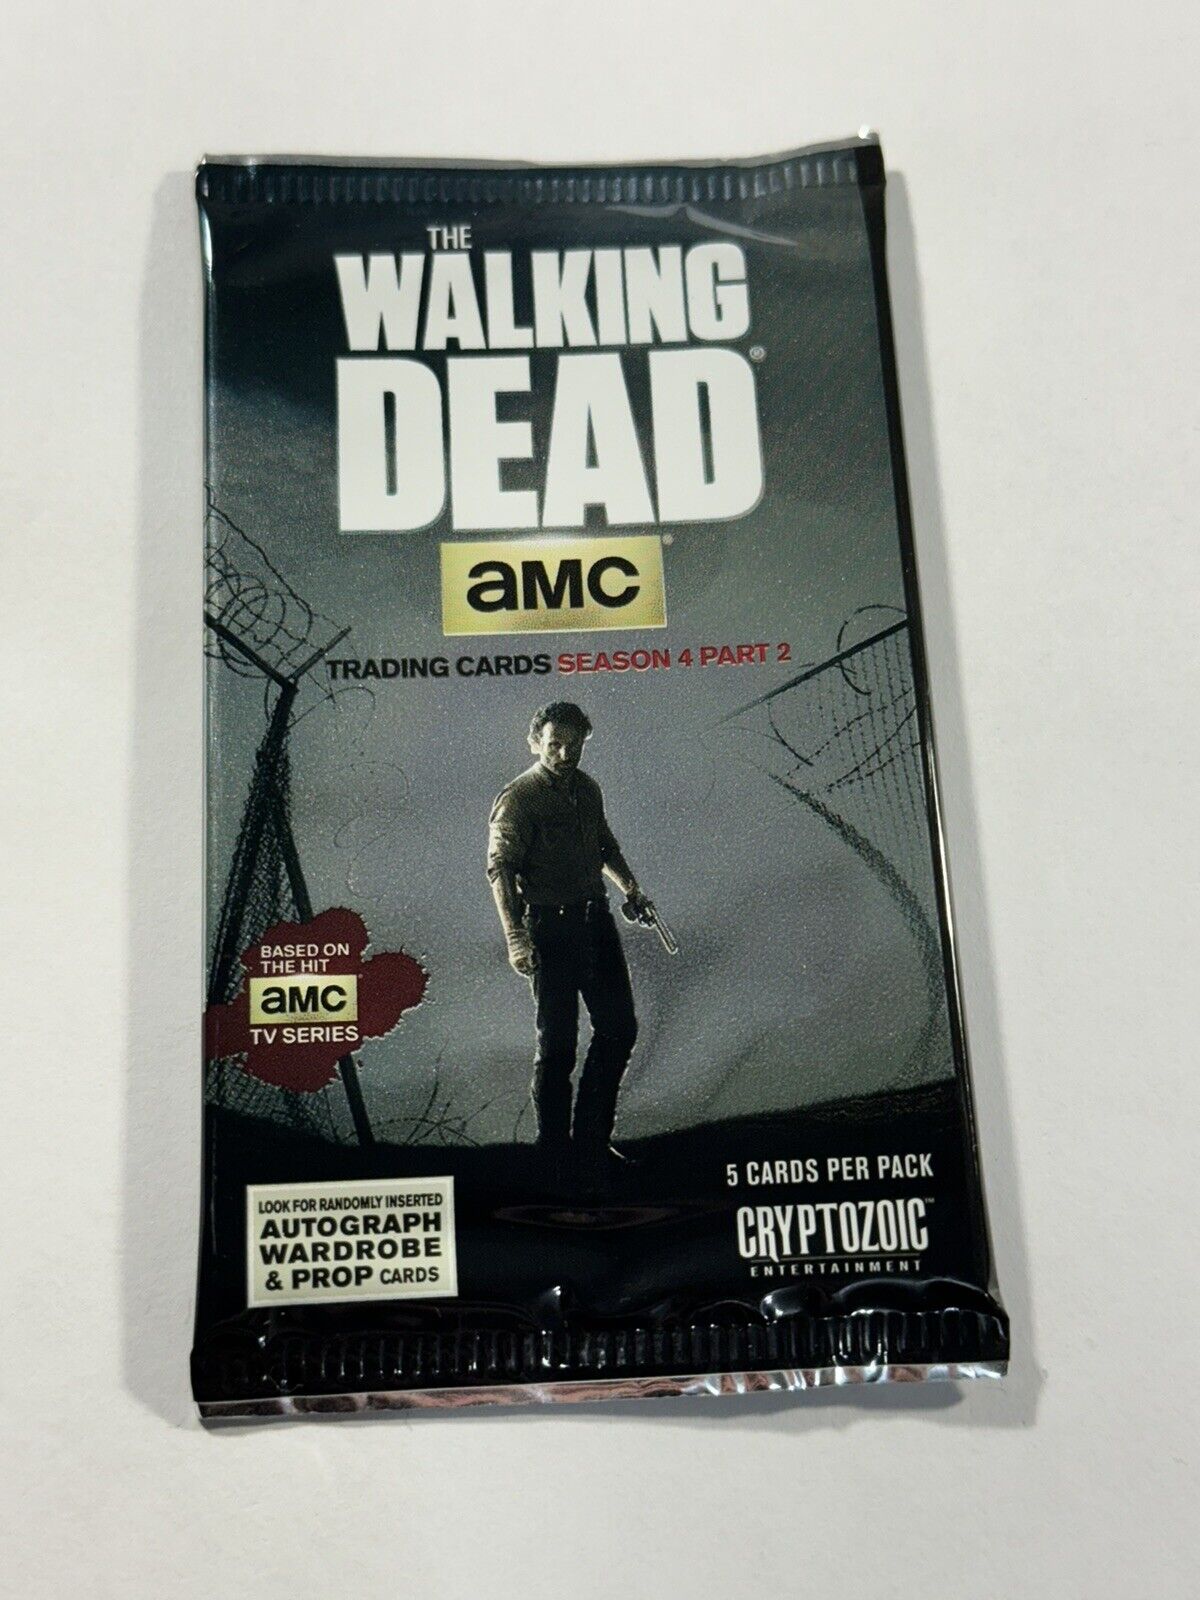 Cryptozoic The Walking Dead Season 4 Part 2 Factory Sealed Hobby Pack From Box